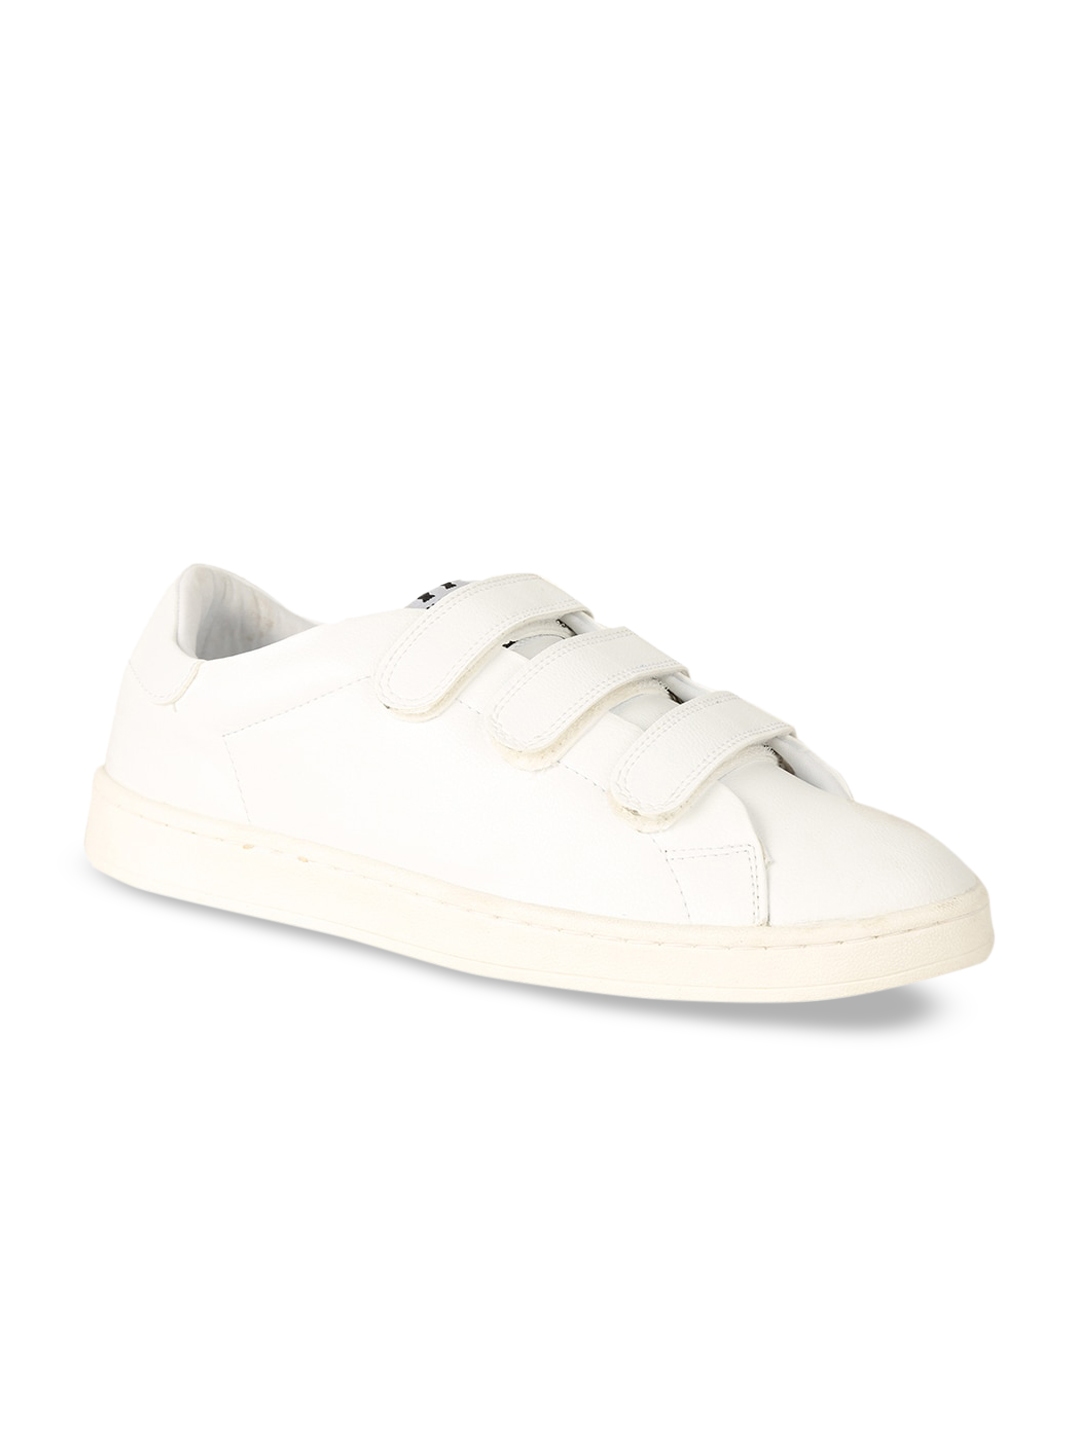 Buy North Star Men White Sneakers - Casual Shoes for Men 12474874 | Myntra